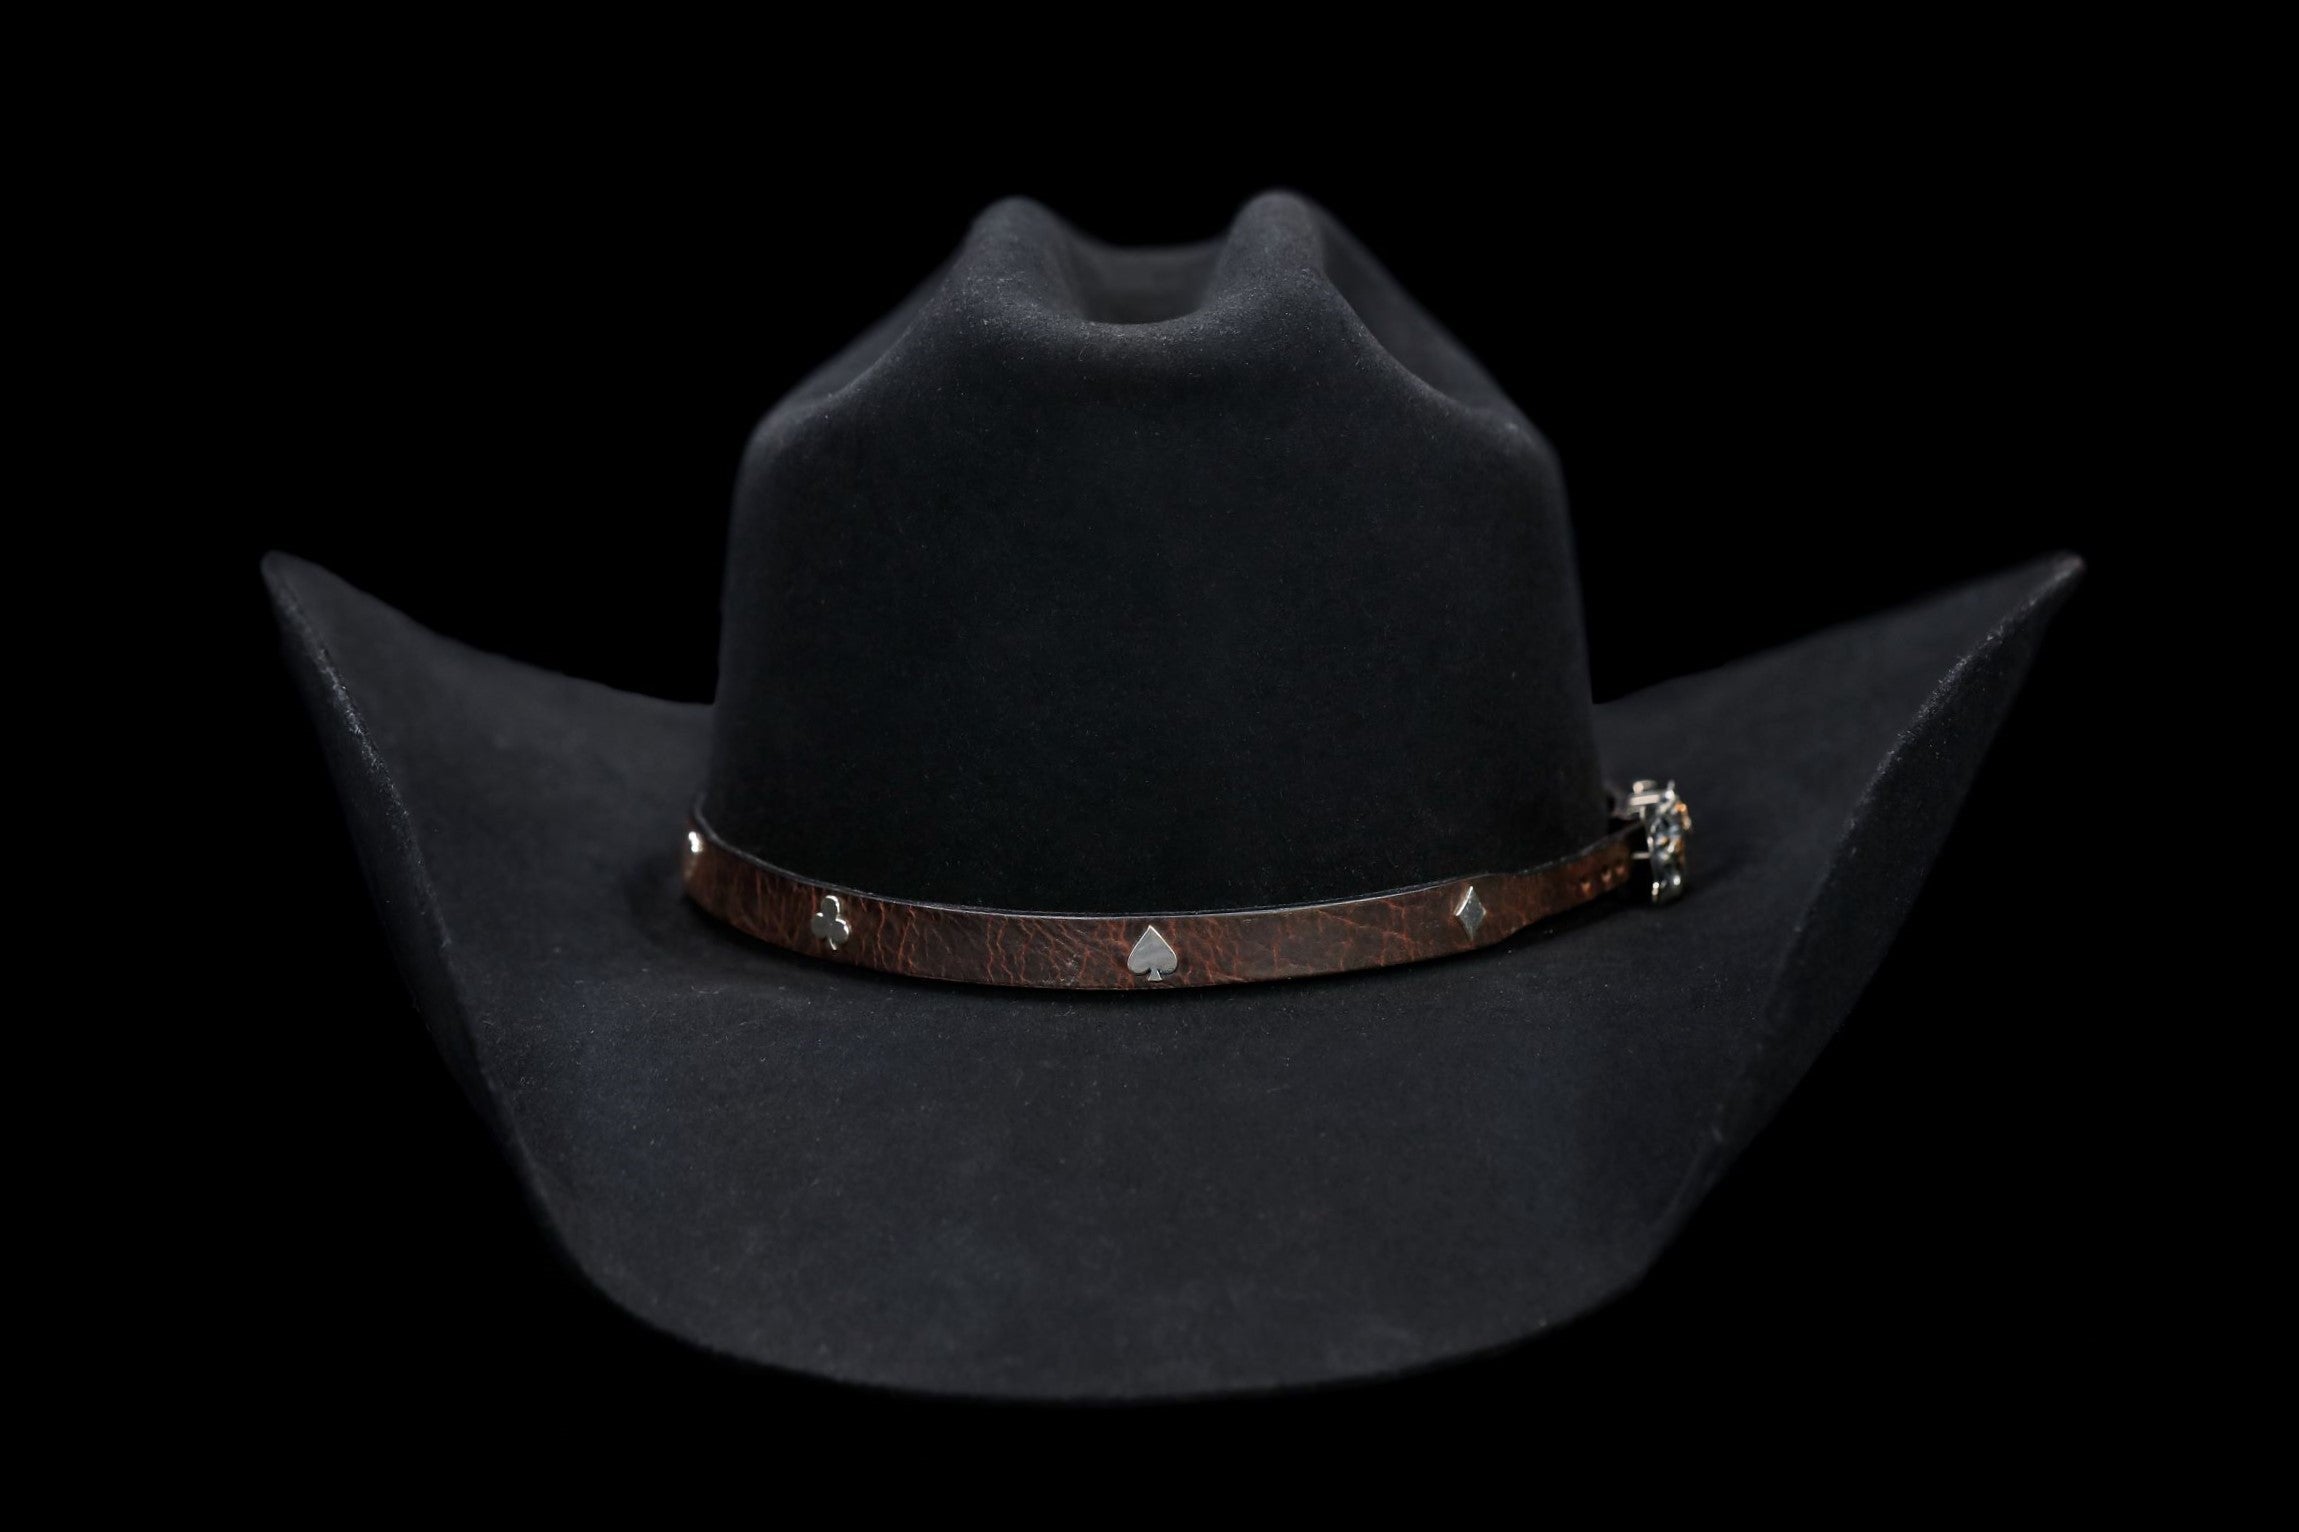 Skull and Crossbones Hat Band | Black and Silver Hat Band | Adjustable Hat Band Brown